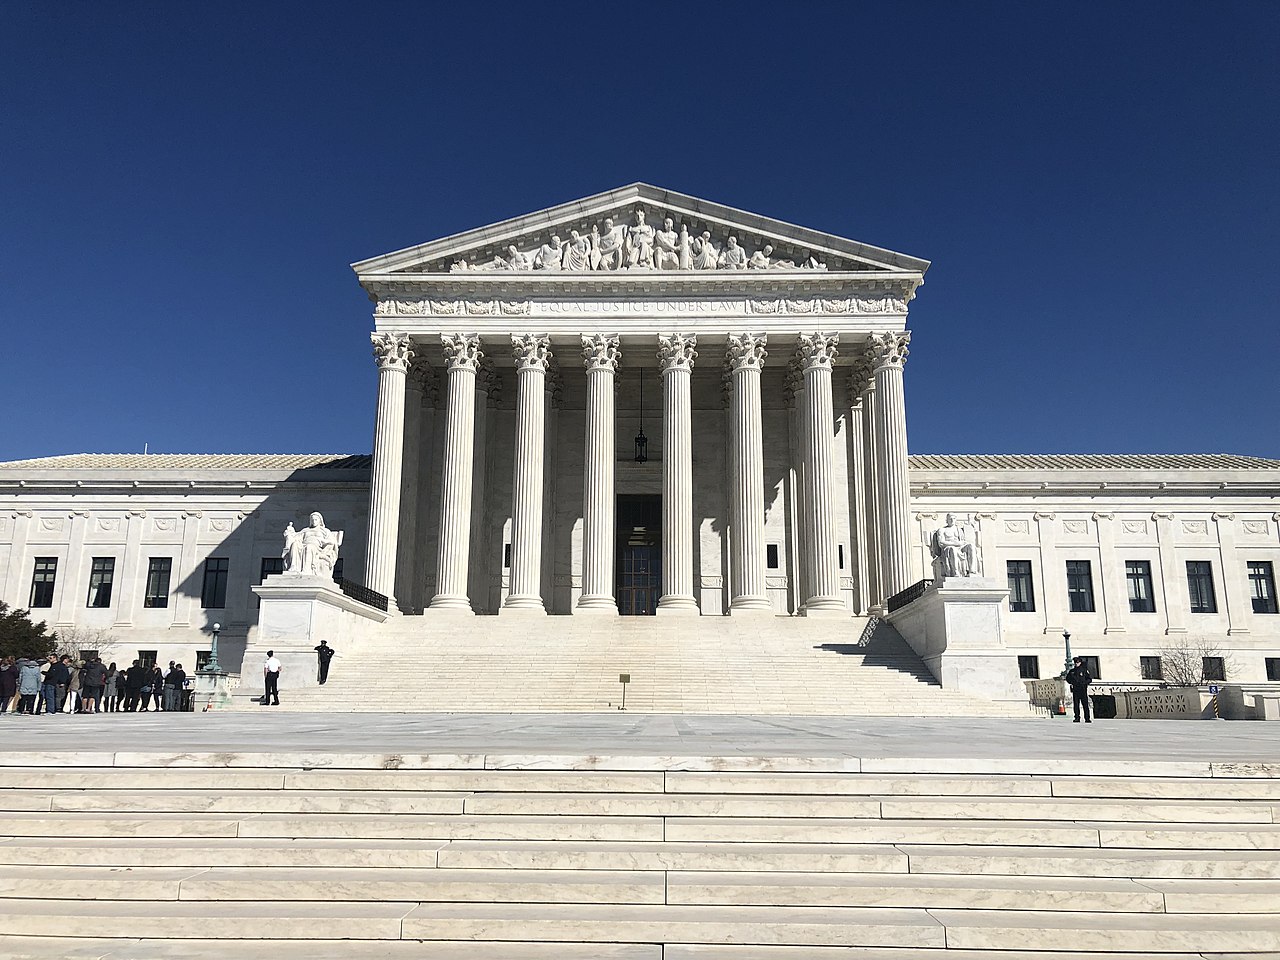 United States Supreme Court Building in Washington D.C., March 12, 2019. (Marielam1/CC-BY-SA-4.0)